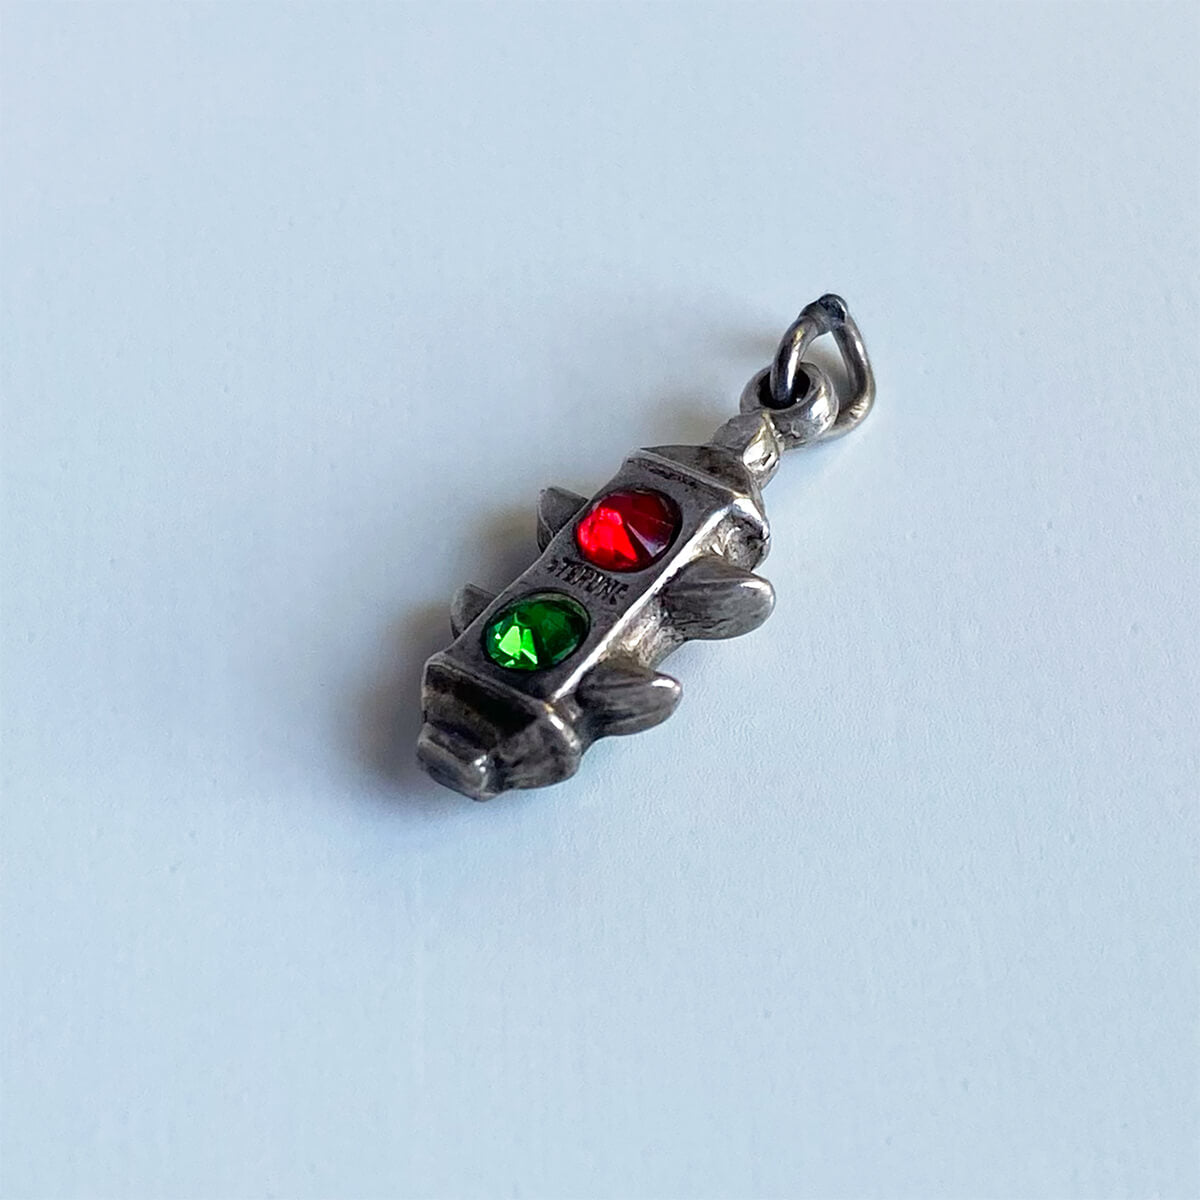 Vintage 1940s traffic lights charm sterling silver with green and red crystals